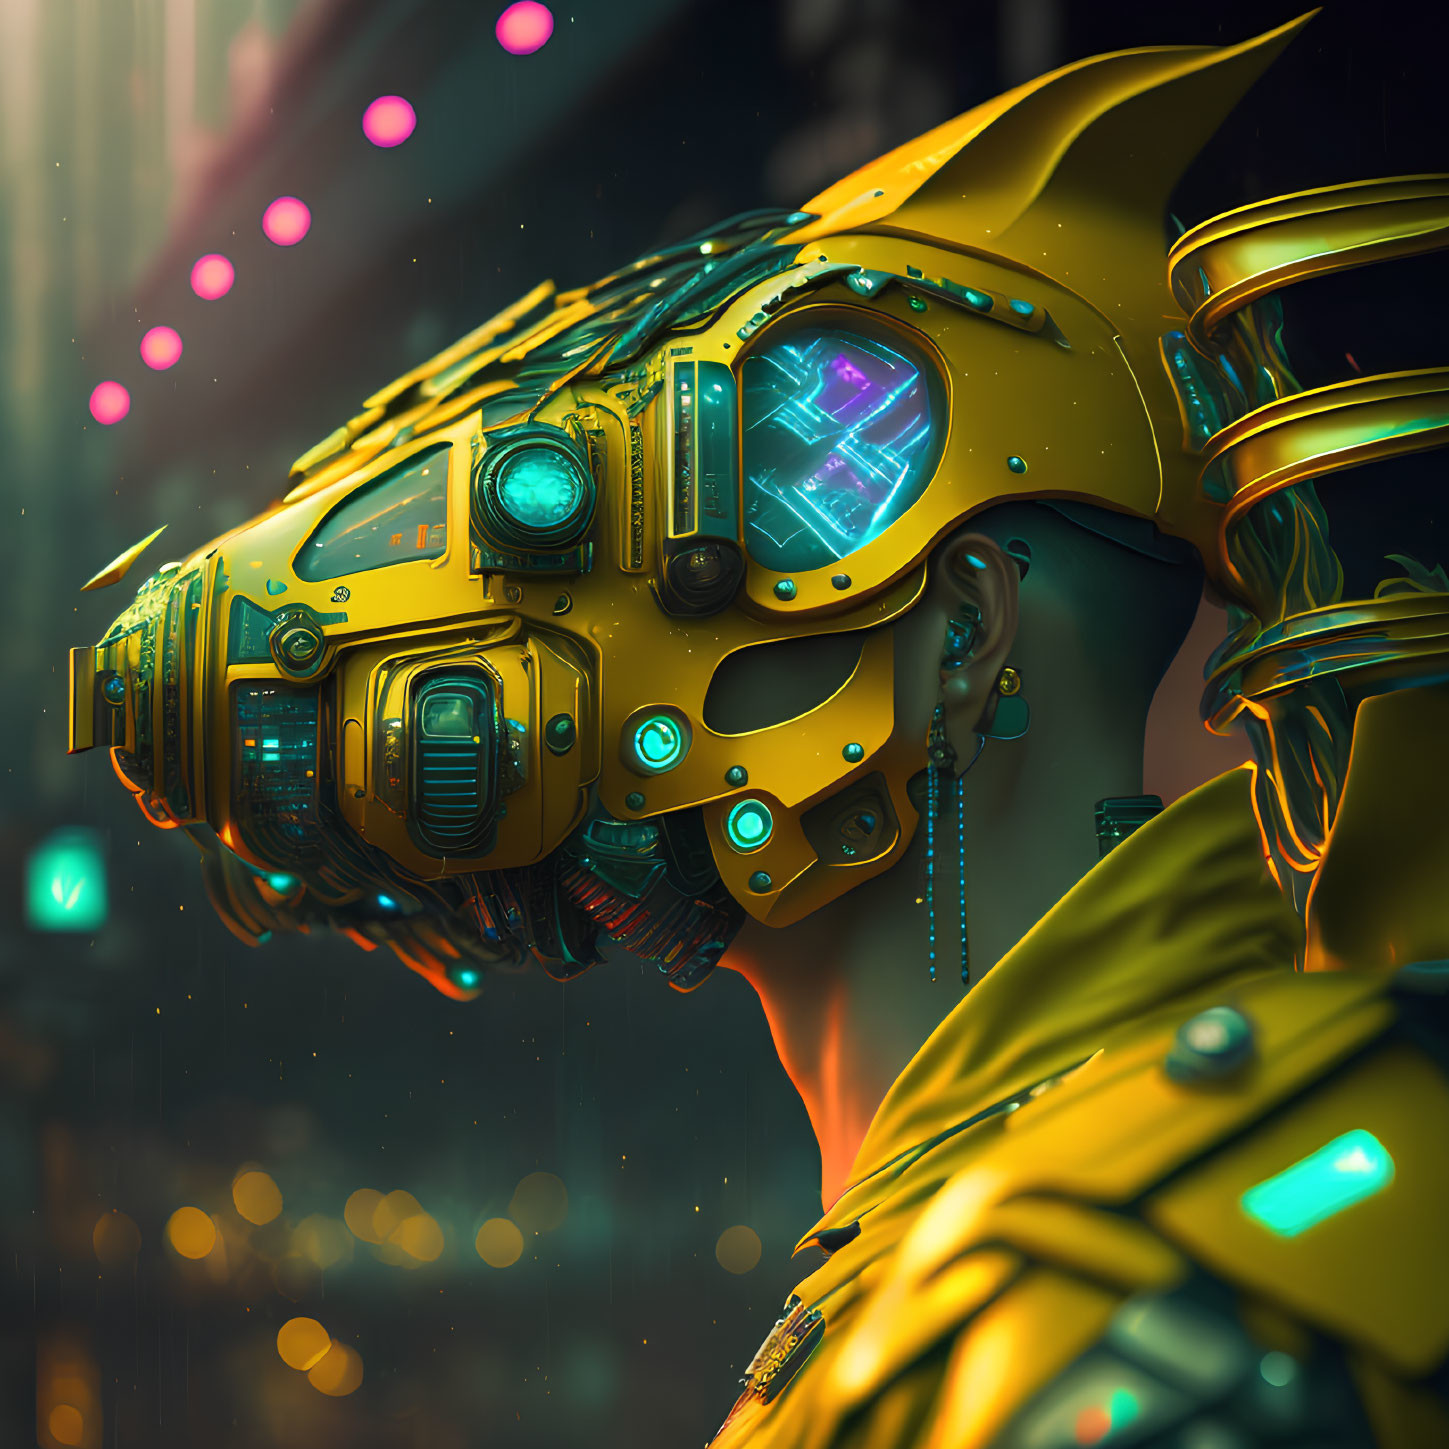 Detailed Yellow Cybernetic Helmet in Neon-Lit Futuristic Setting